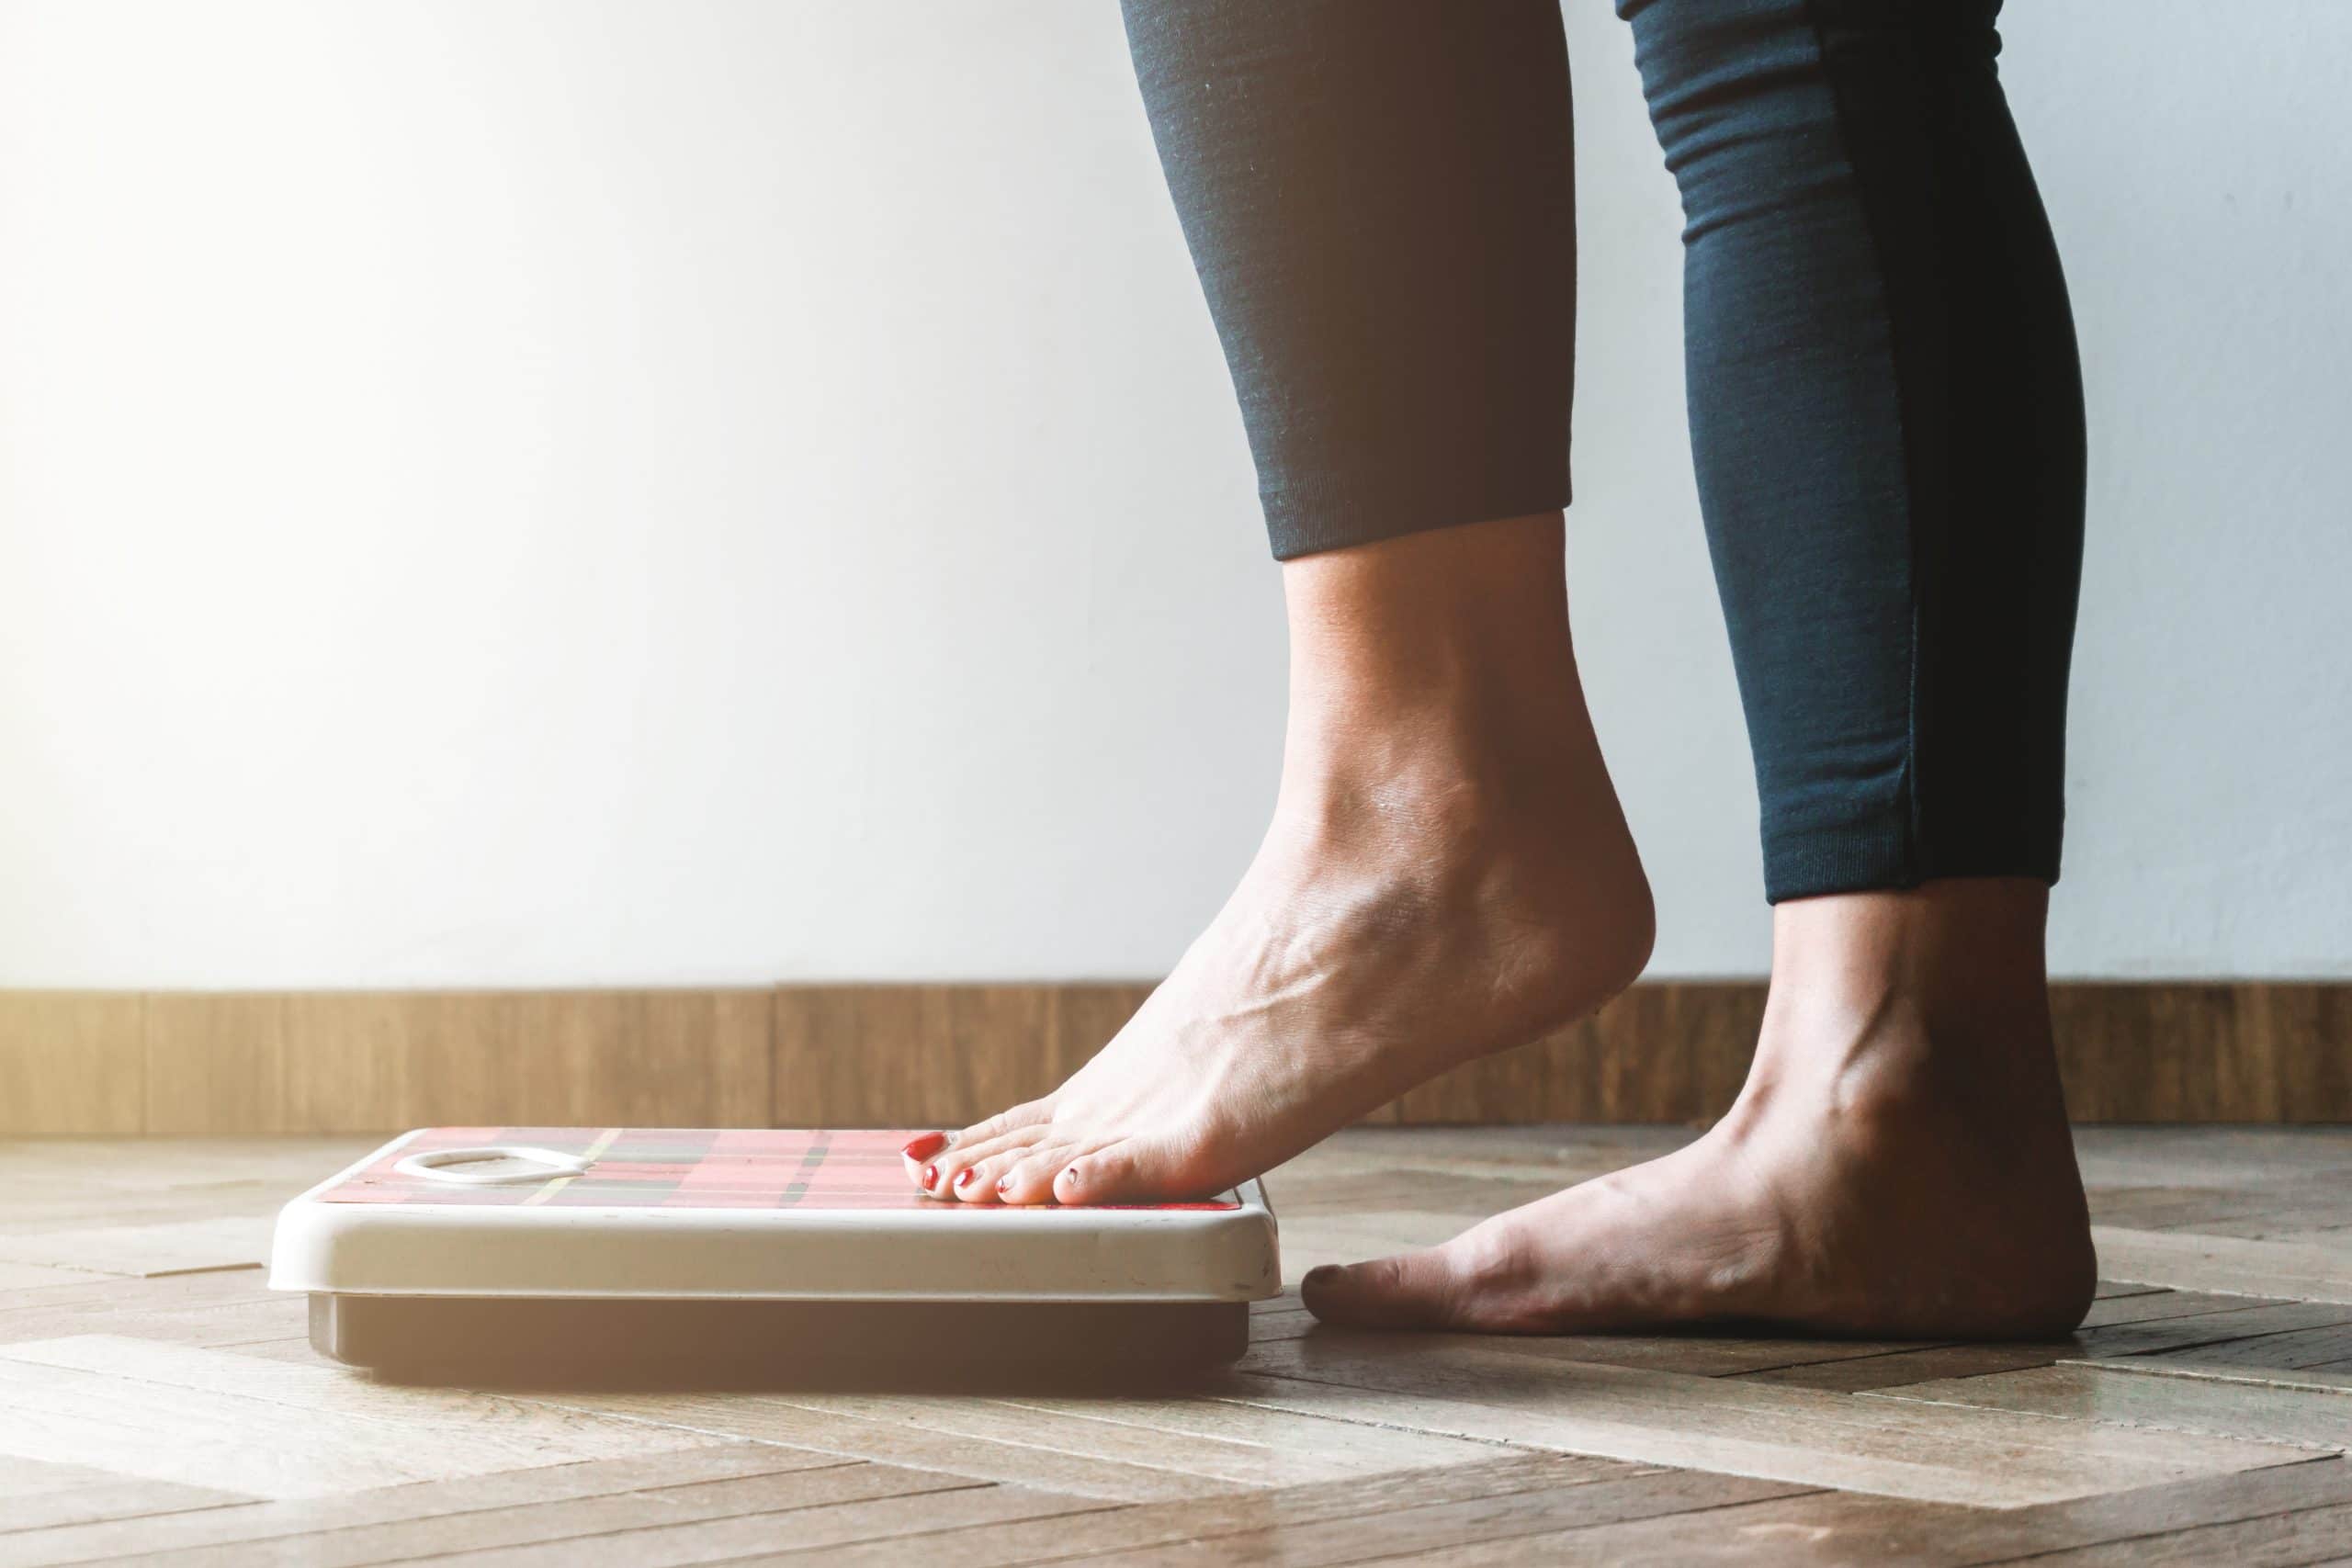 A woman steps on a scale to track her healthy weight loss progress